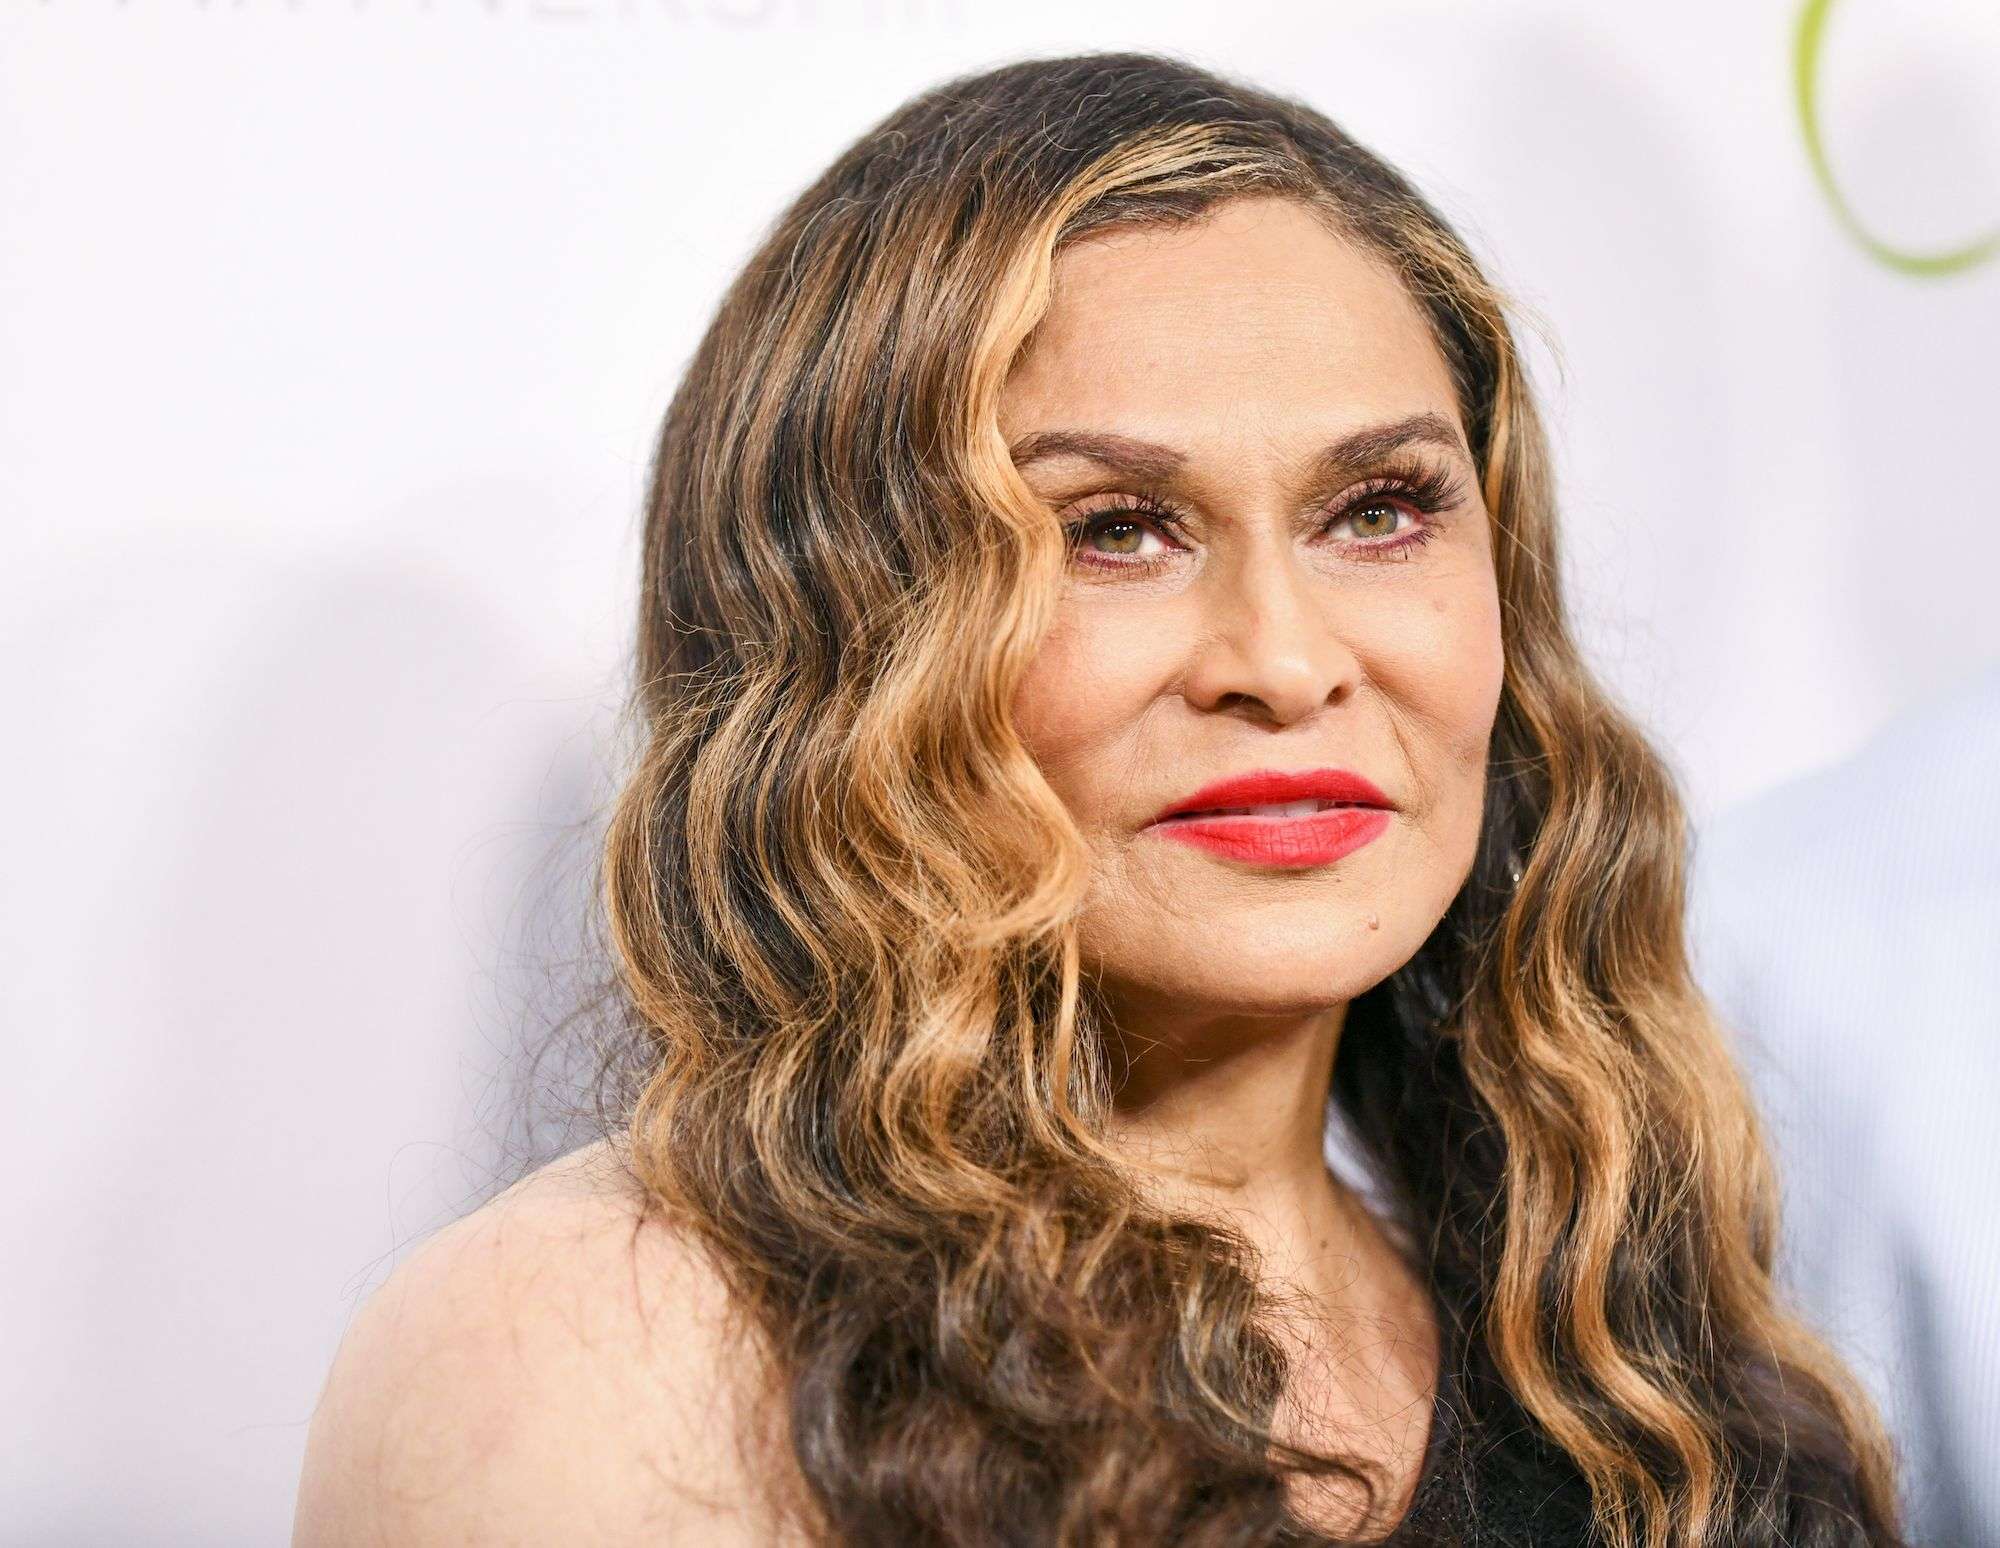 Beyoncé's Mother, Tina Knowles Biography: Husband, Age, Children, Siblings, Net Worth, Movies, Parents, Books